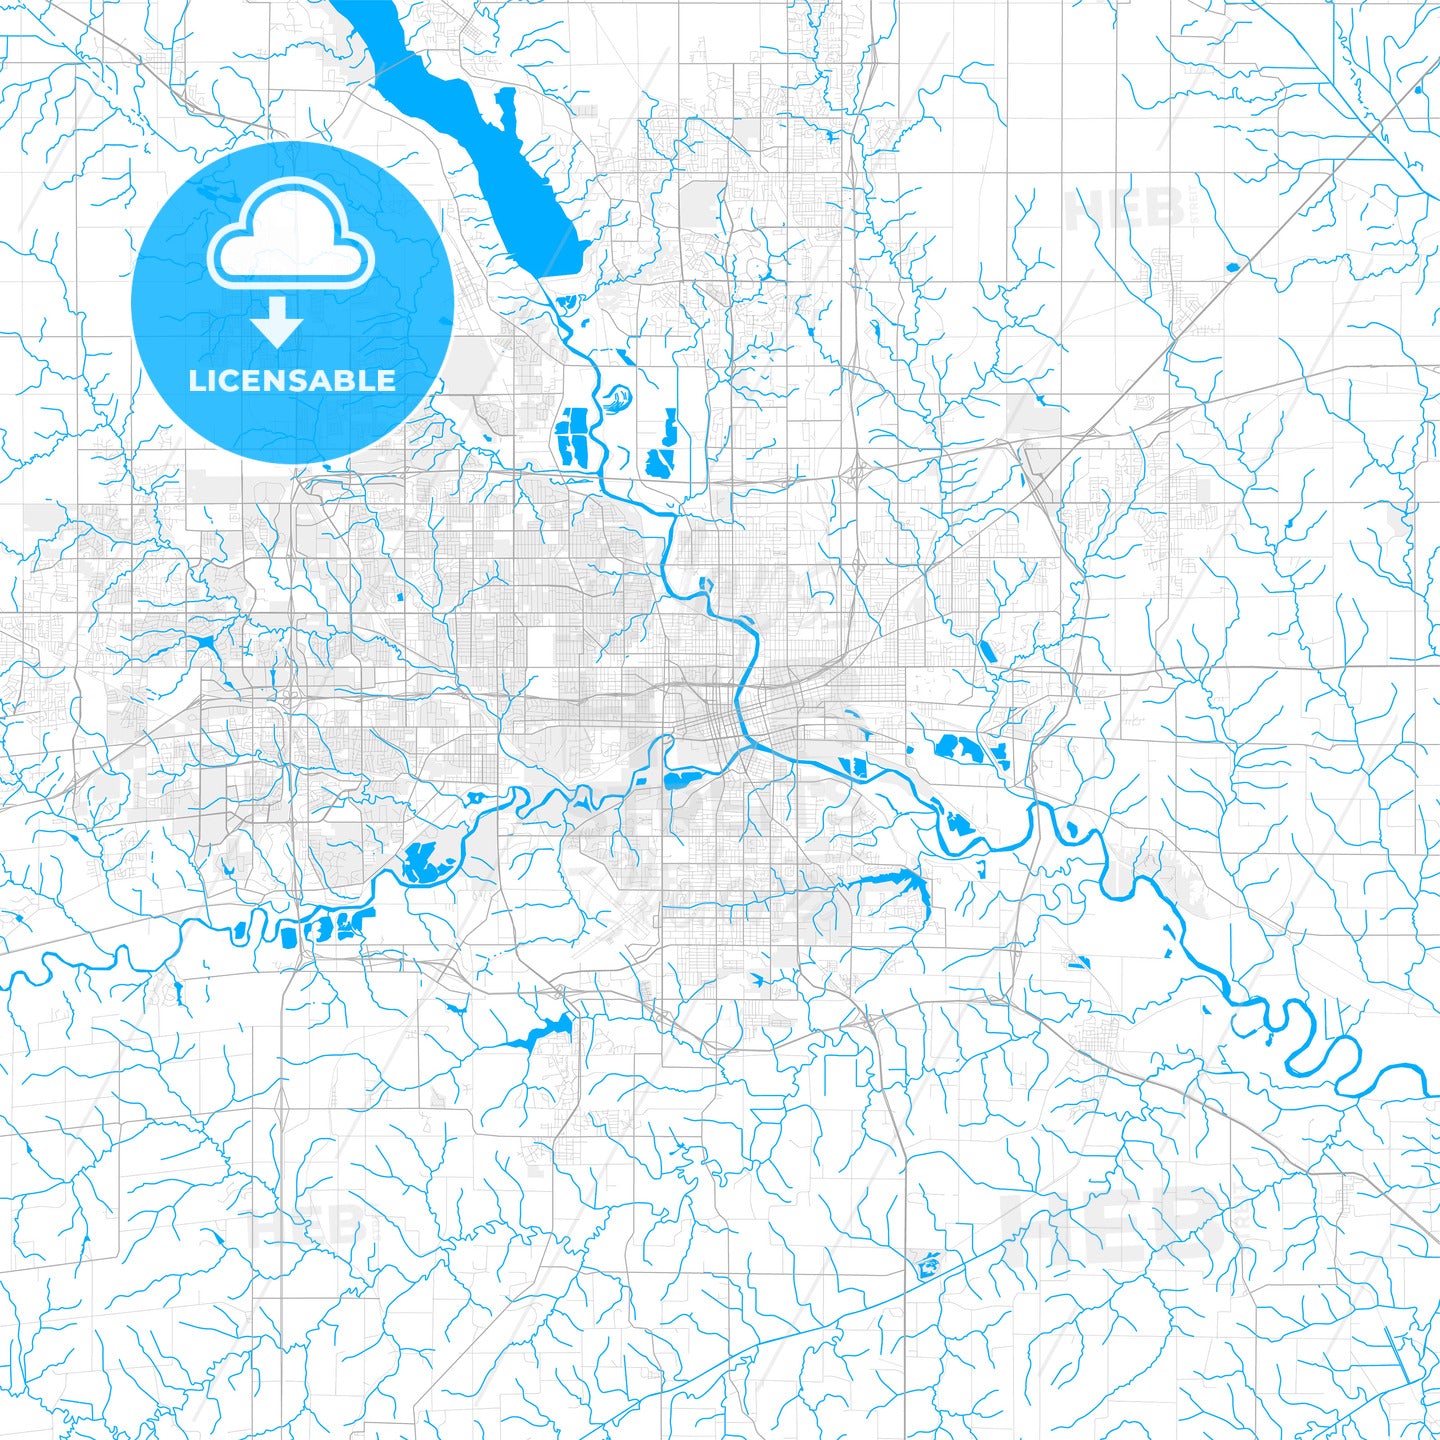 Rich detailed vector map of Des Moines, Iowa, USA